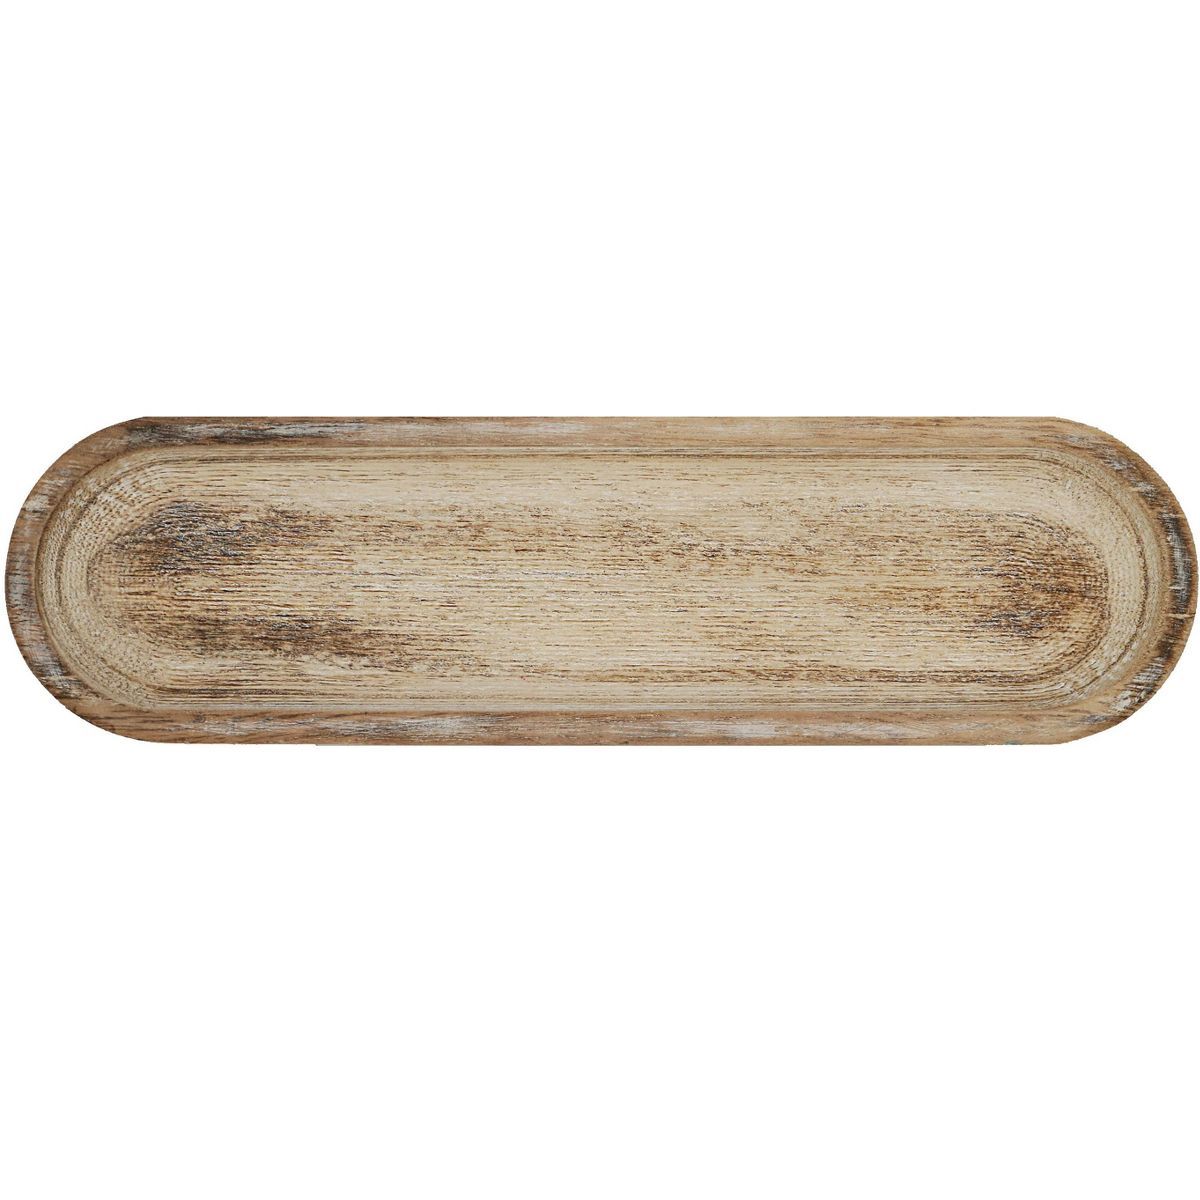 Sweet Water Decor Large Rustic Wood Tray - 14x4" | Target